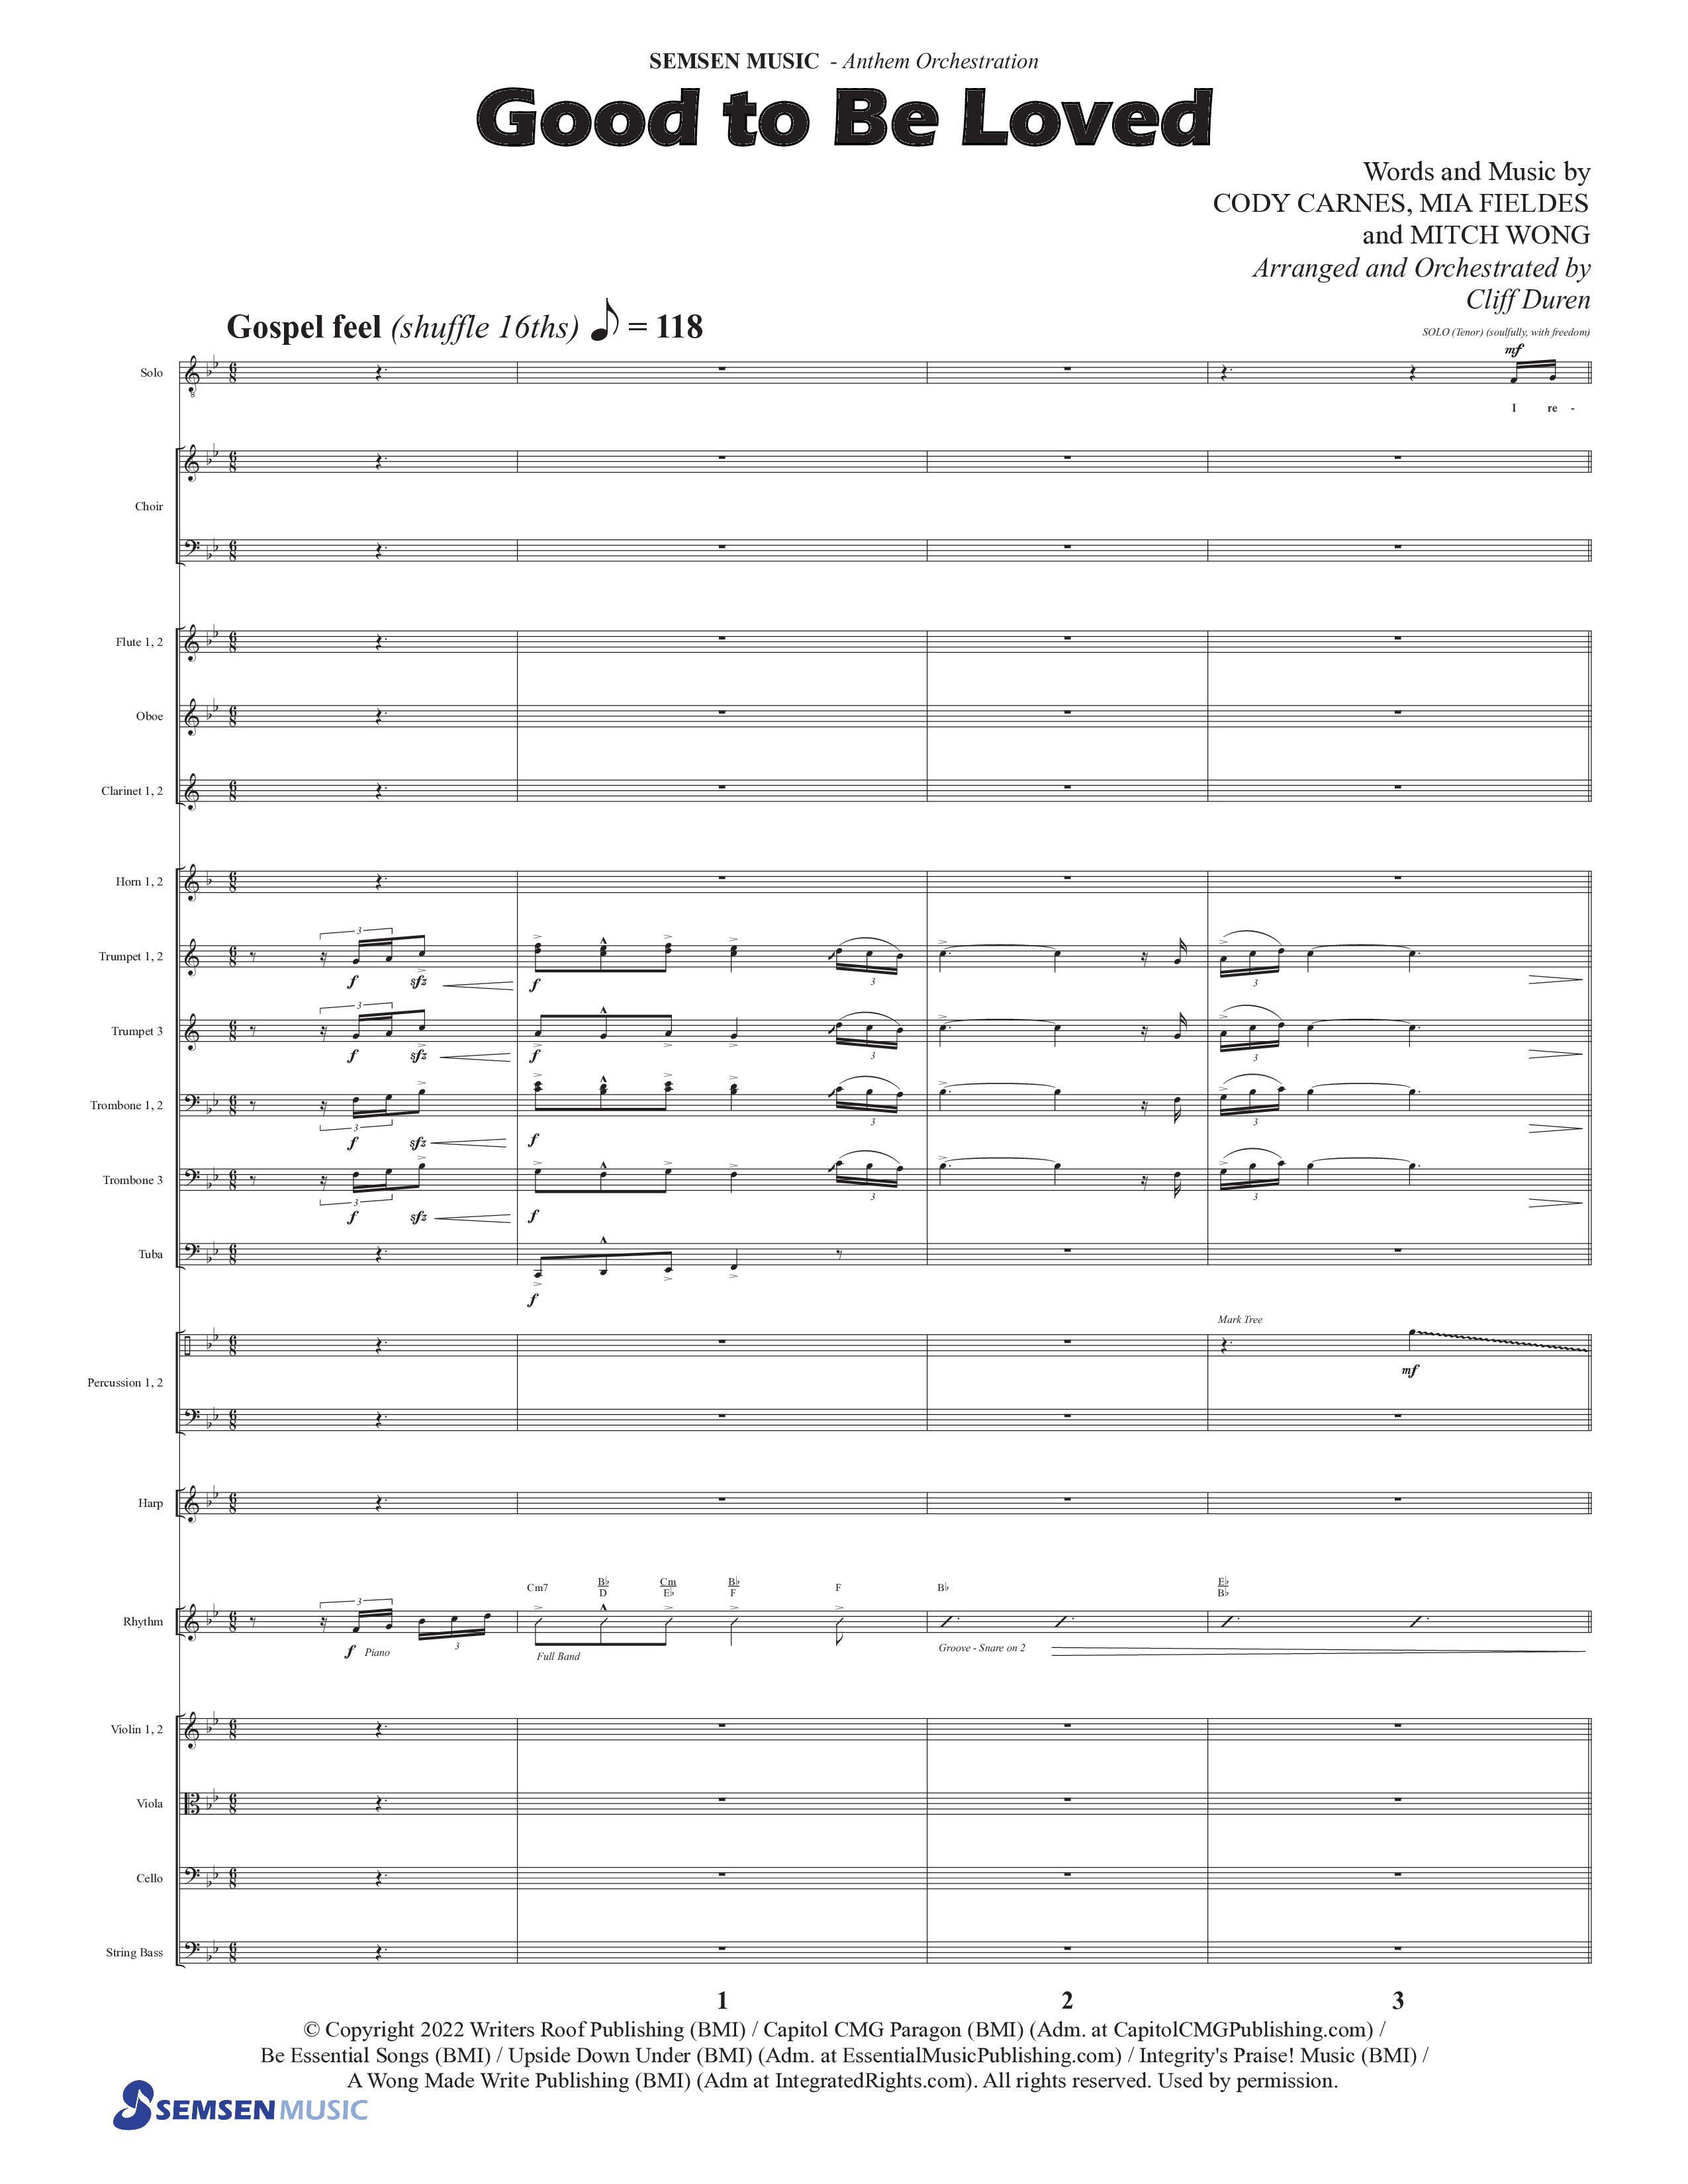 Good To Be Loved (Choral Anthem SATB) Conductor's Score (Semsen Music / Arr. Cliff Duren)